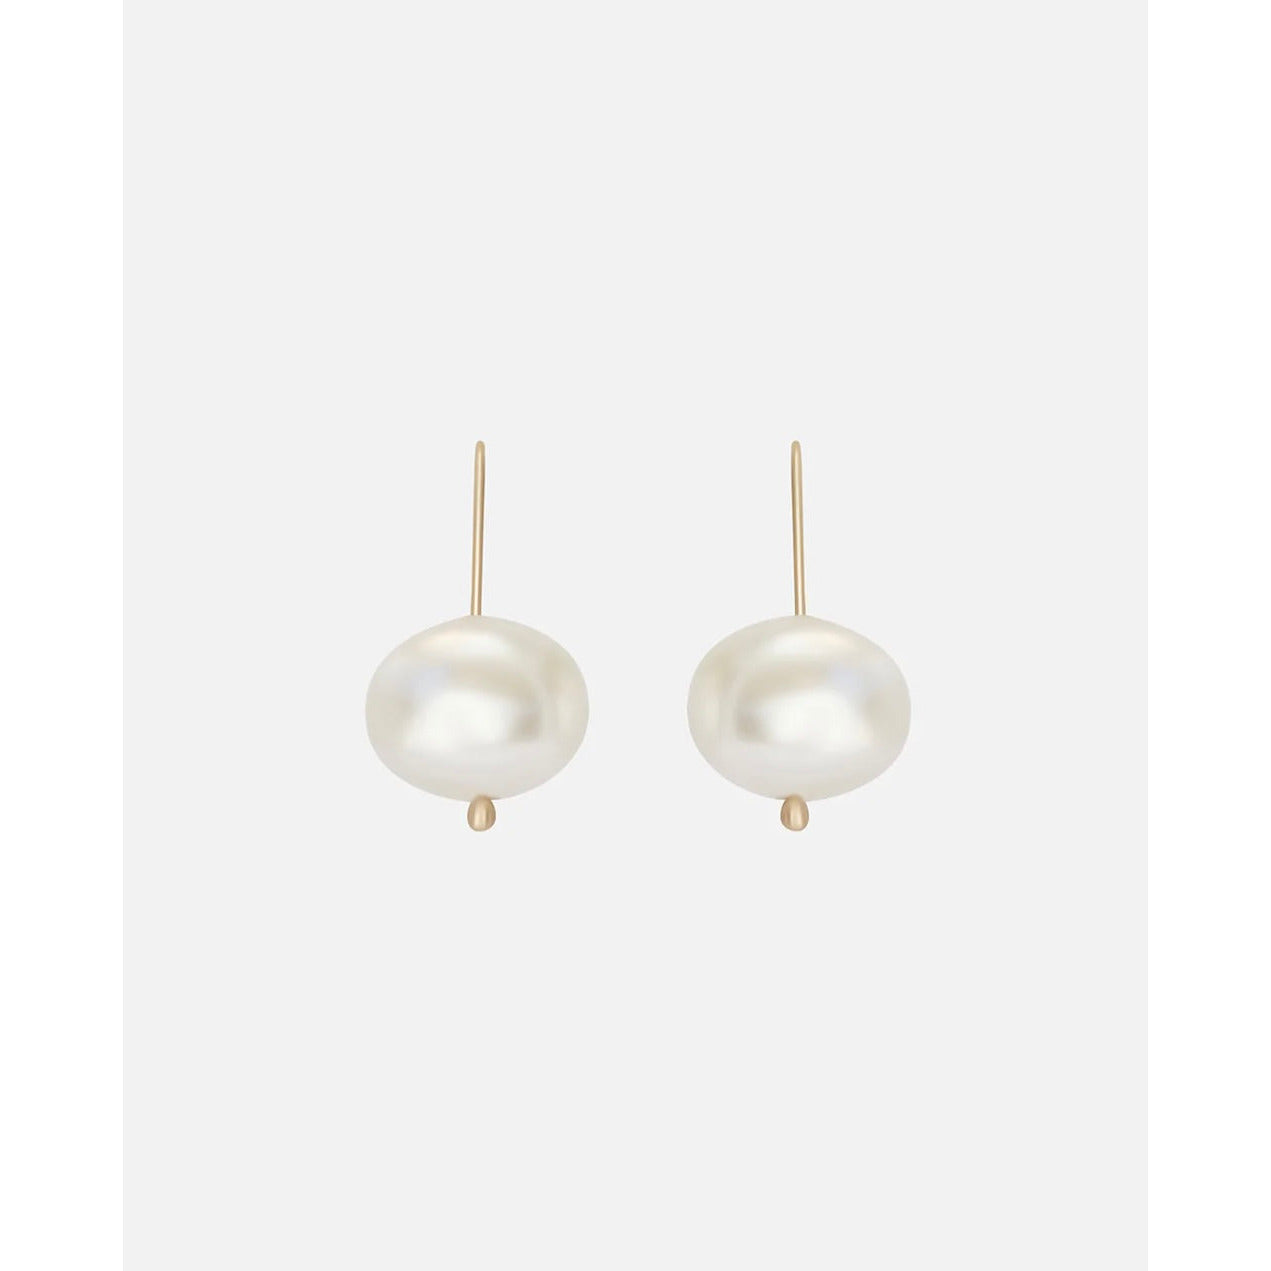 Experience the elegance and natural beauty of our Mother of Pearl earrings. With their exquisite design and timeless appeal, these earrings are the perfect accessory to elevate any outfit. Add a touch of sophistication to your style with our stunning Mother of Pearl earrings today  Pearls approx HxW: 13.9mm x 15.4mm